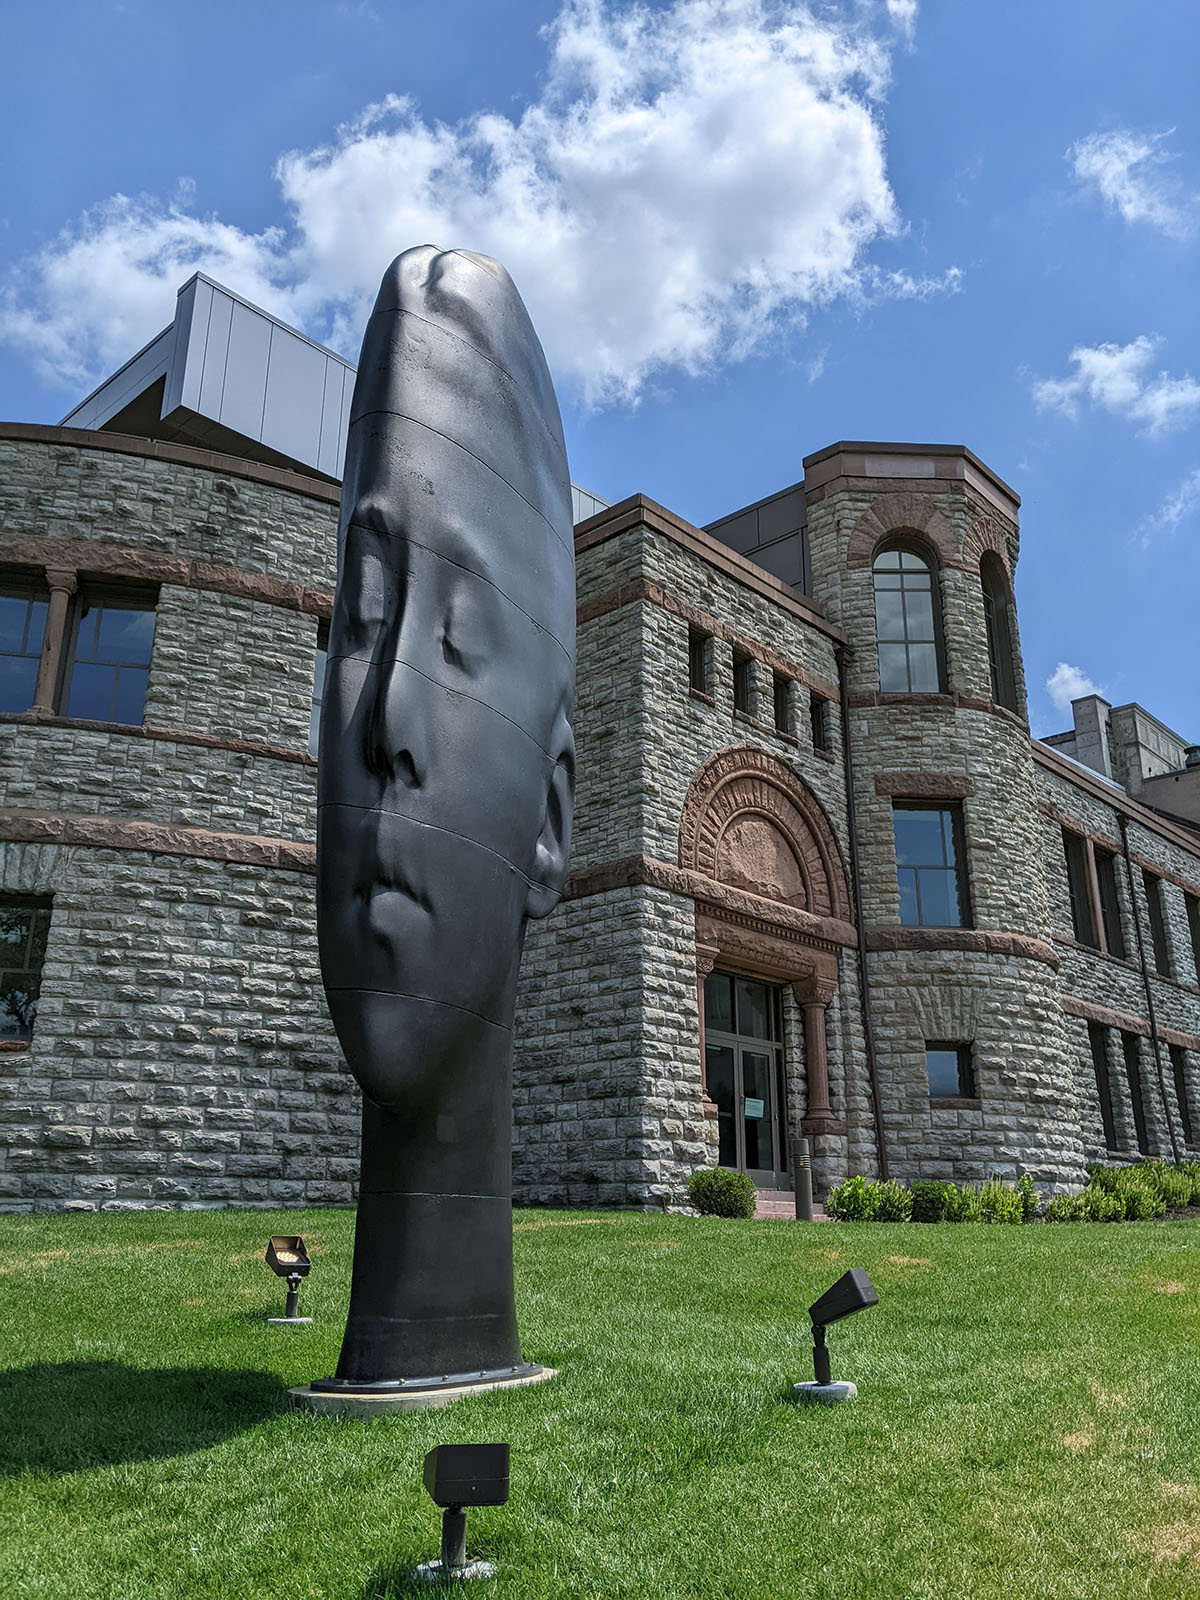 A monumental, thin black sculpture of a woman’s face in front of a stone facade